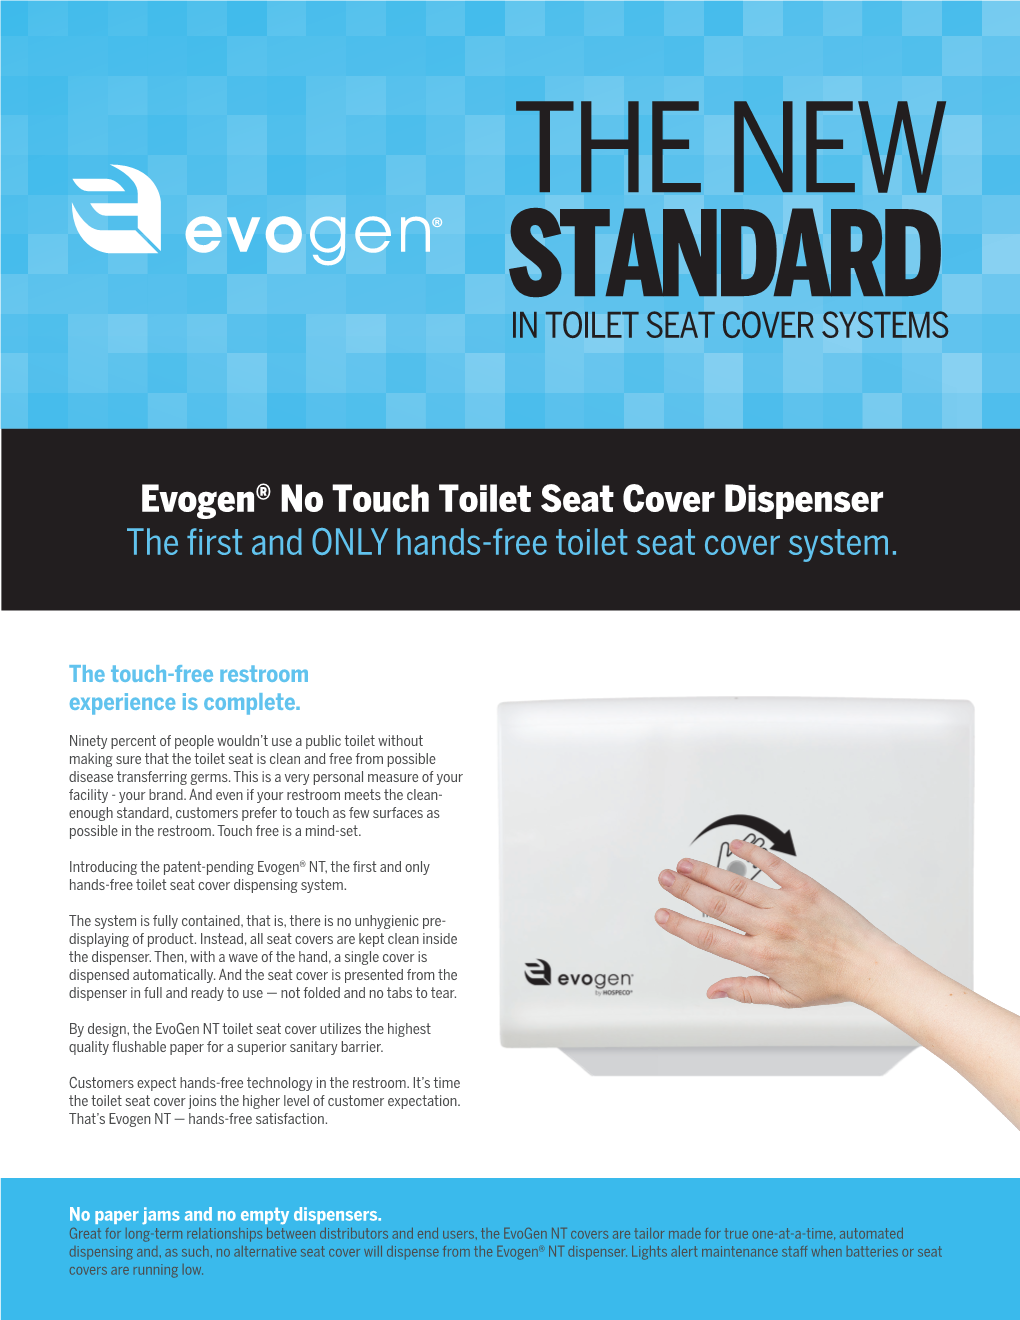 Evogen® No Touch Toilet Seat Cover Dispenser the First and ONLY Hands-Free Toilet Seat Cover System